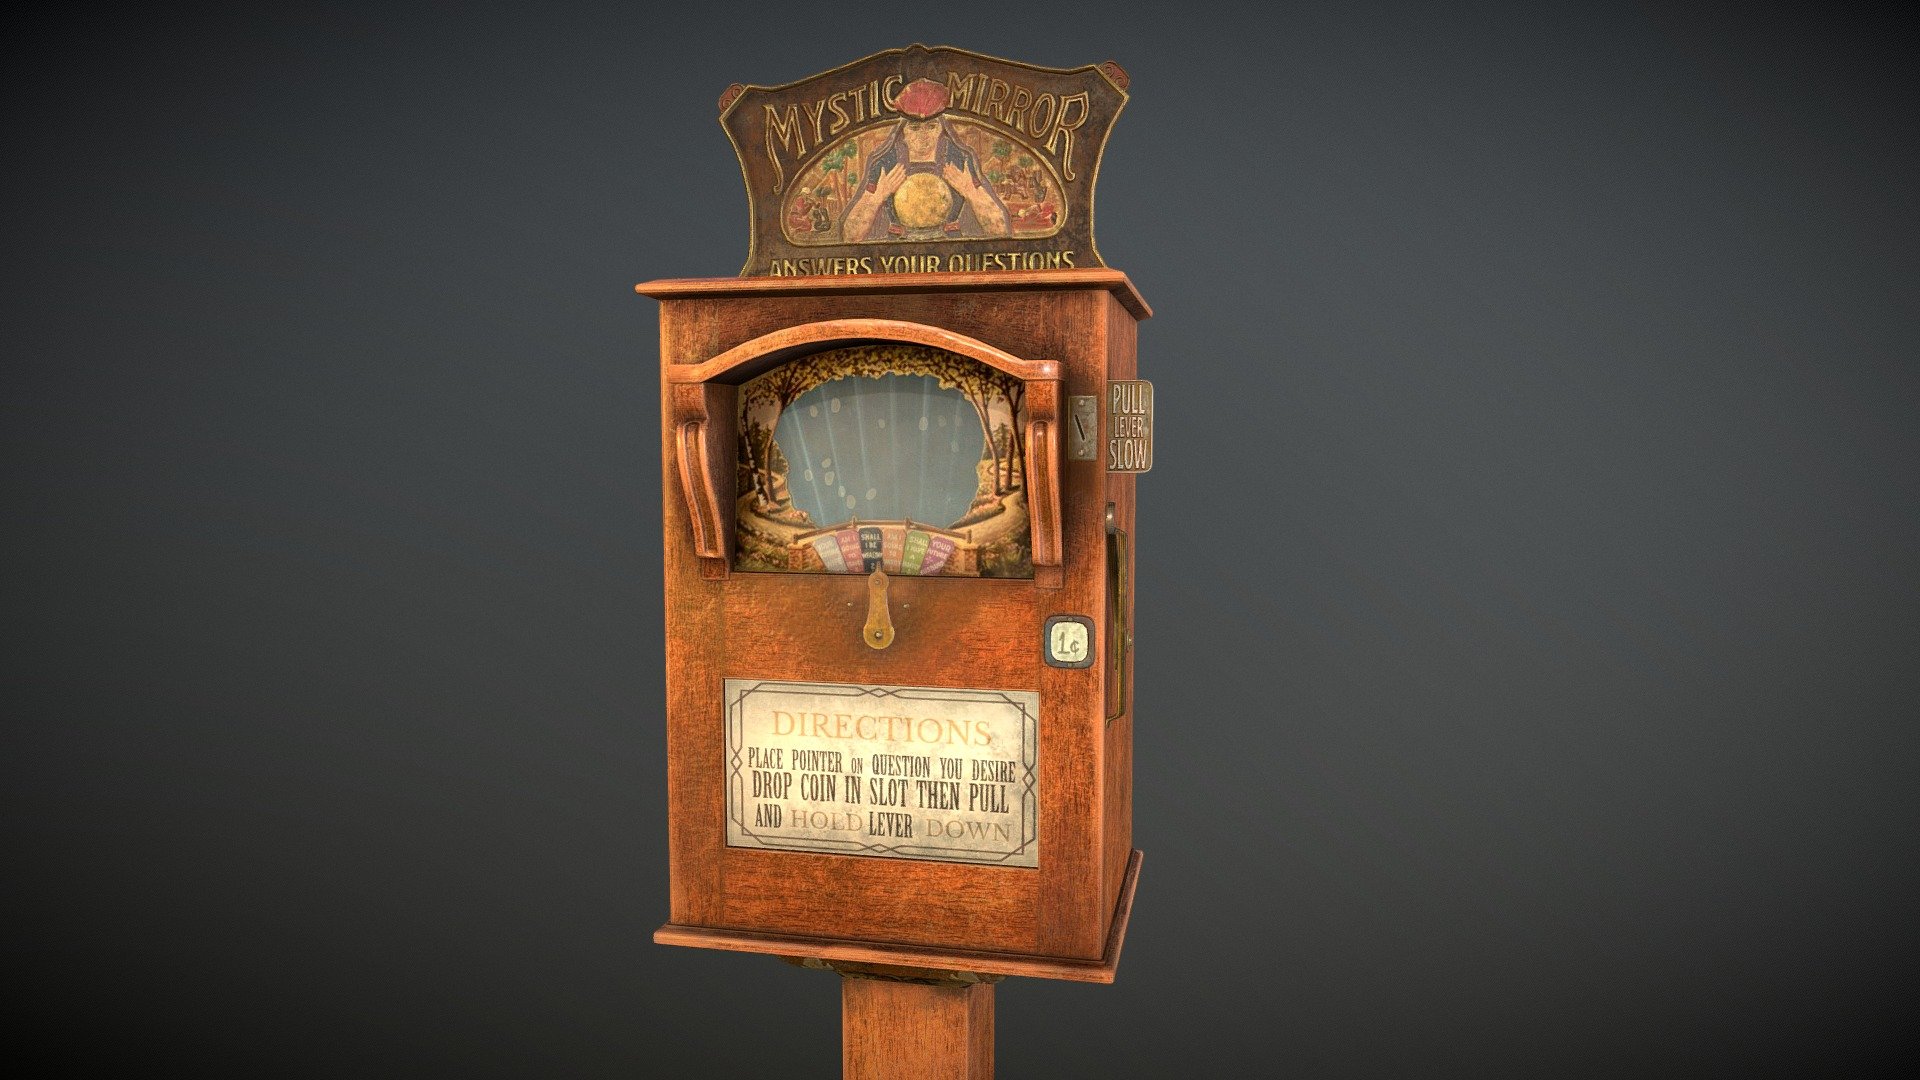 An antique Mystic Mirror fortune telling mutoscope from the 1920's. I saw this on pinterest and thought it would be fun to model as another little lockdown project! Made with 3DS Max and Substance Painter 3d model